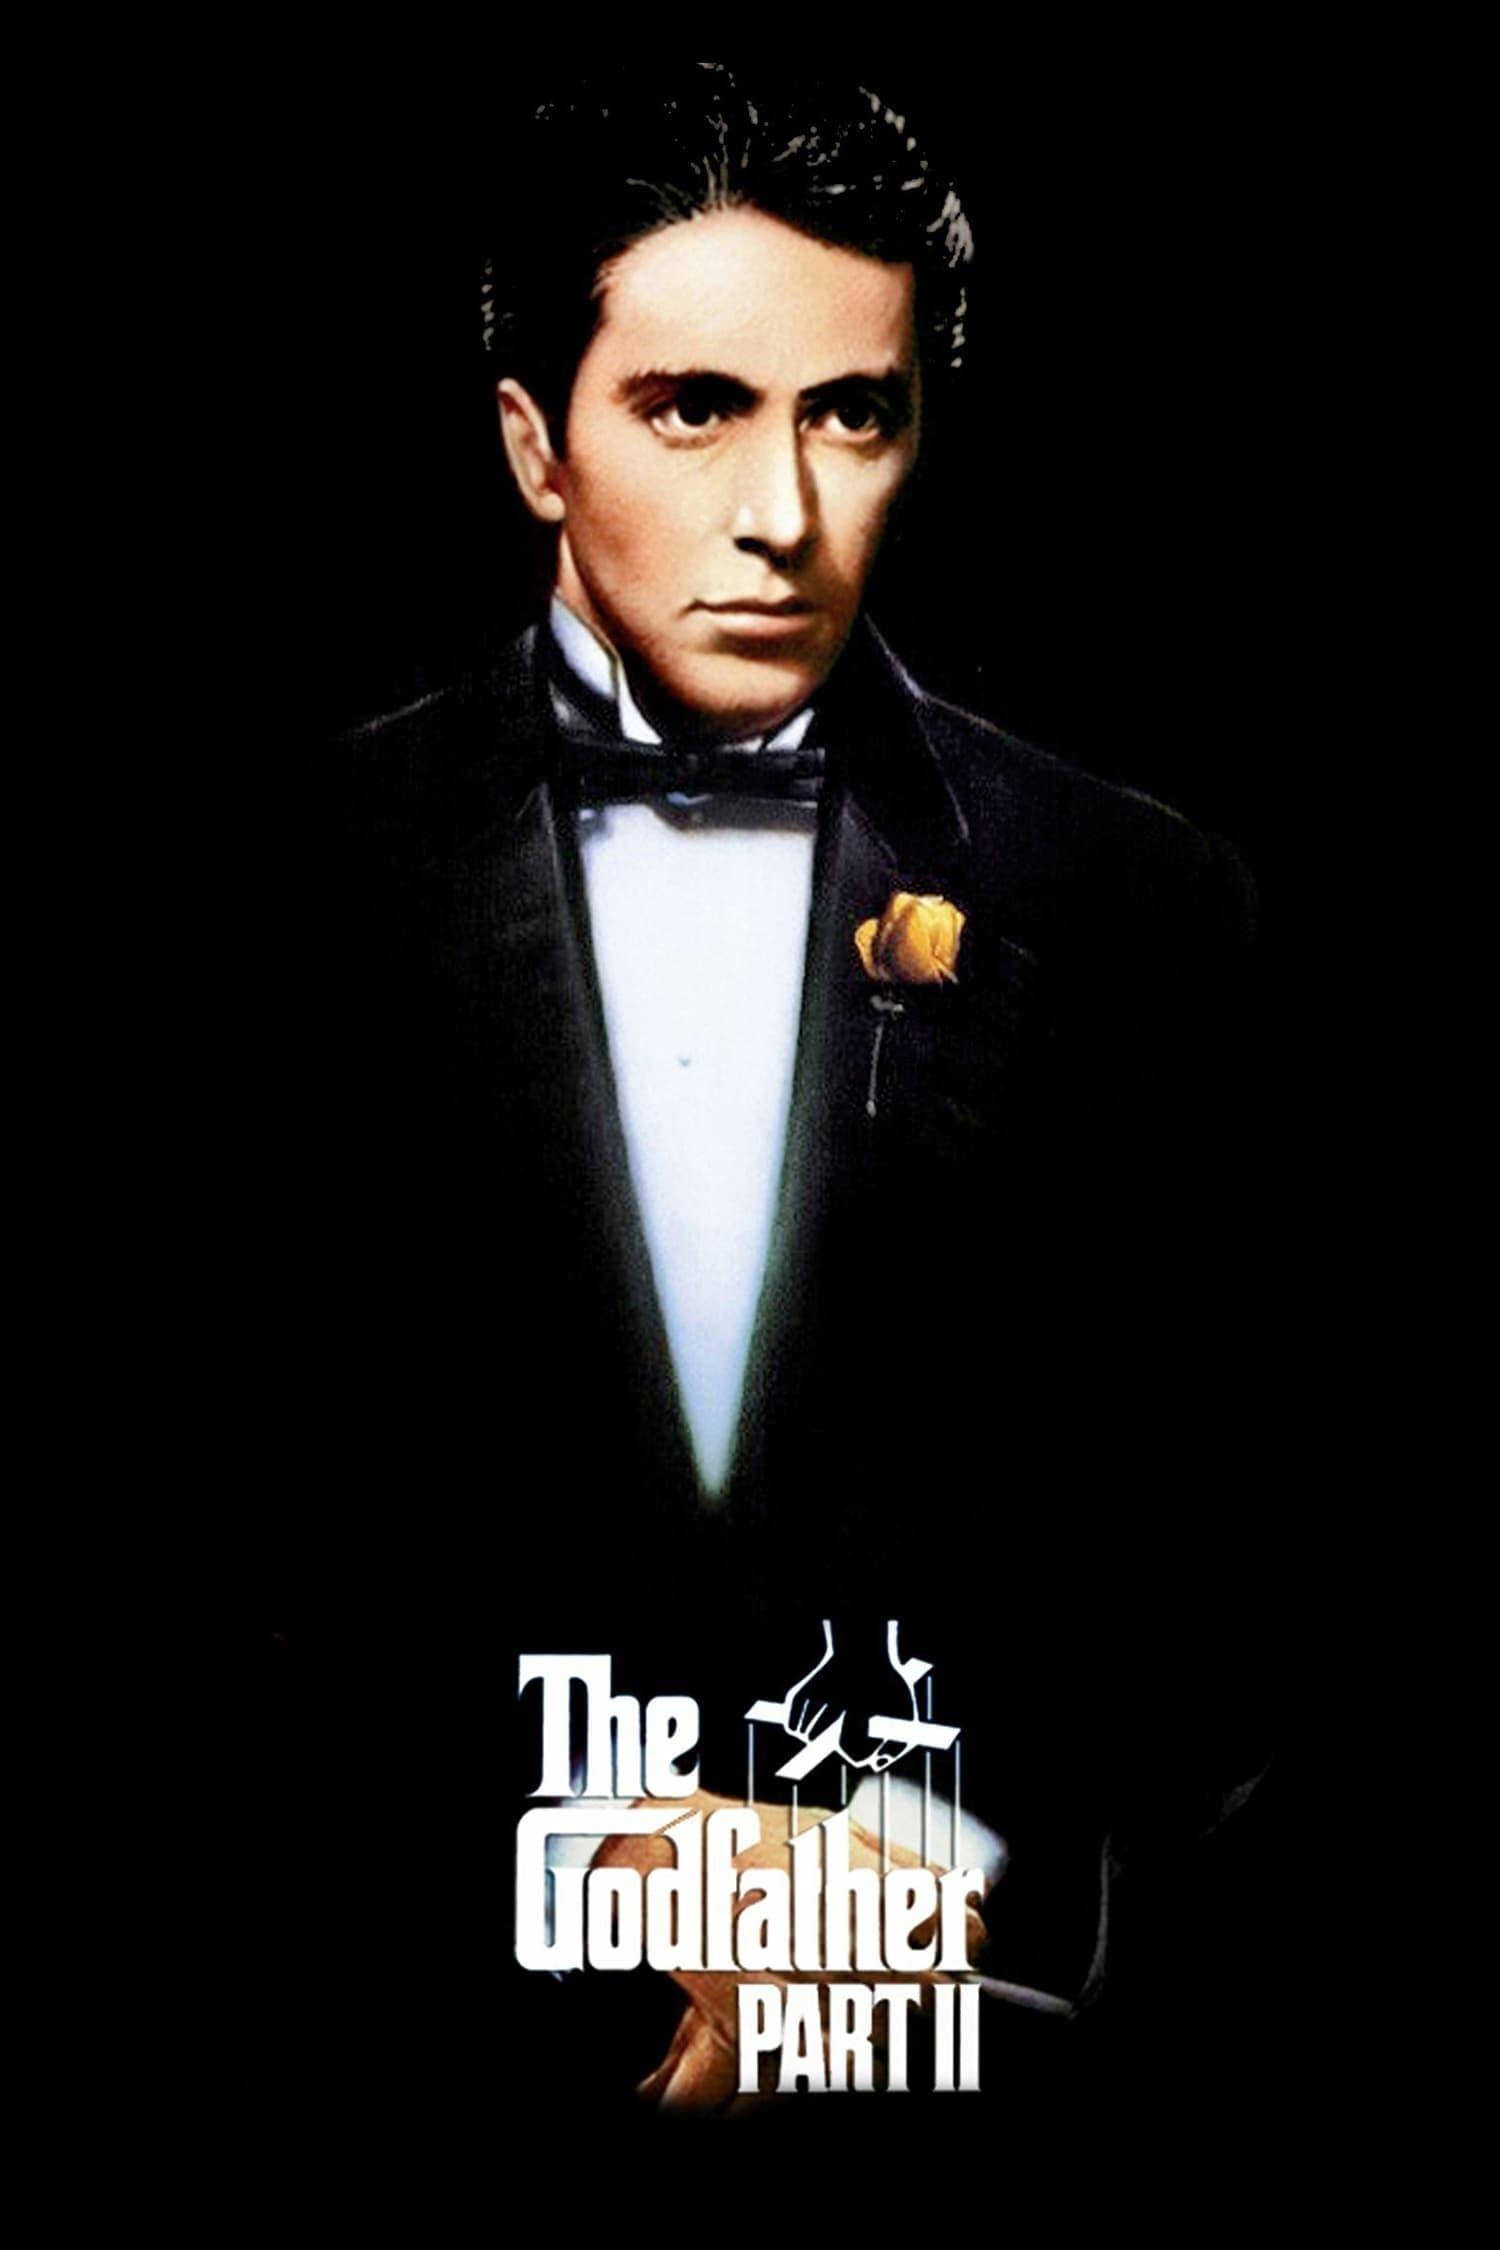 Movie poster of "The Godfather Part II"